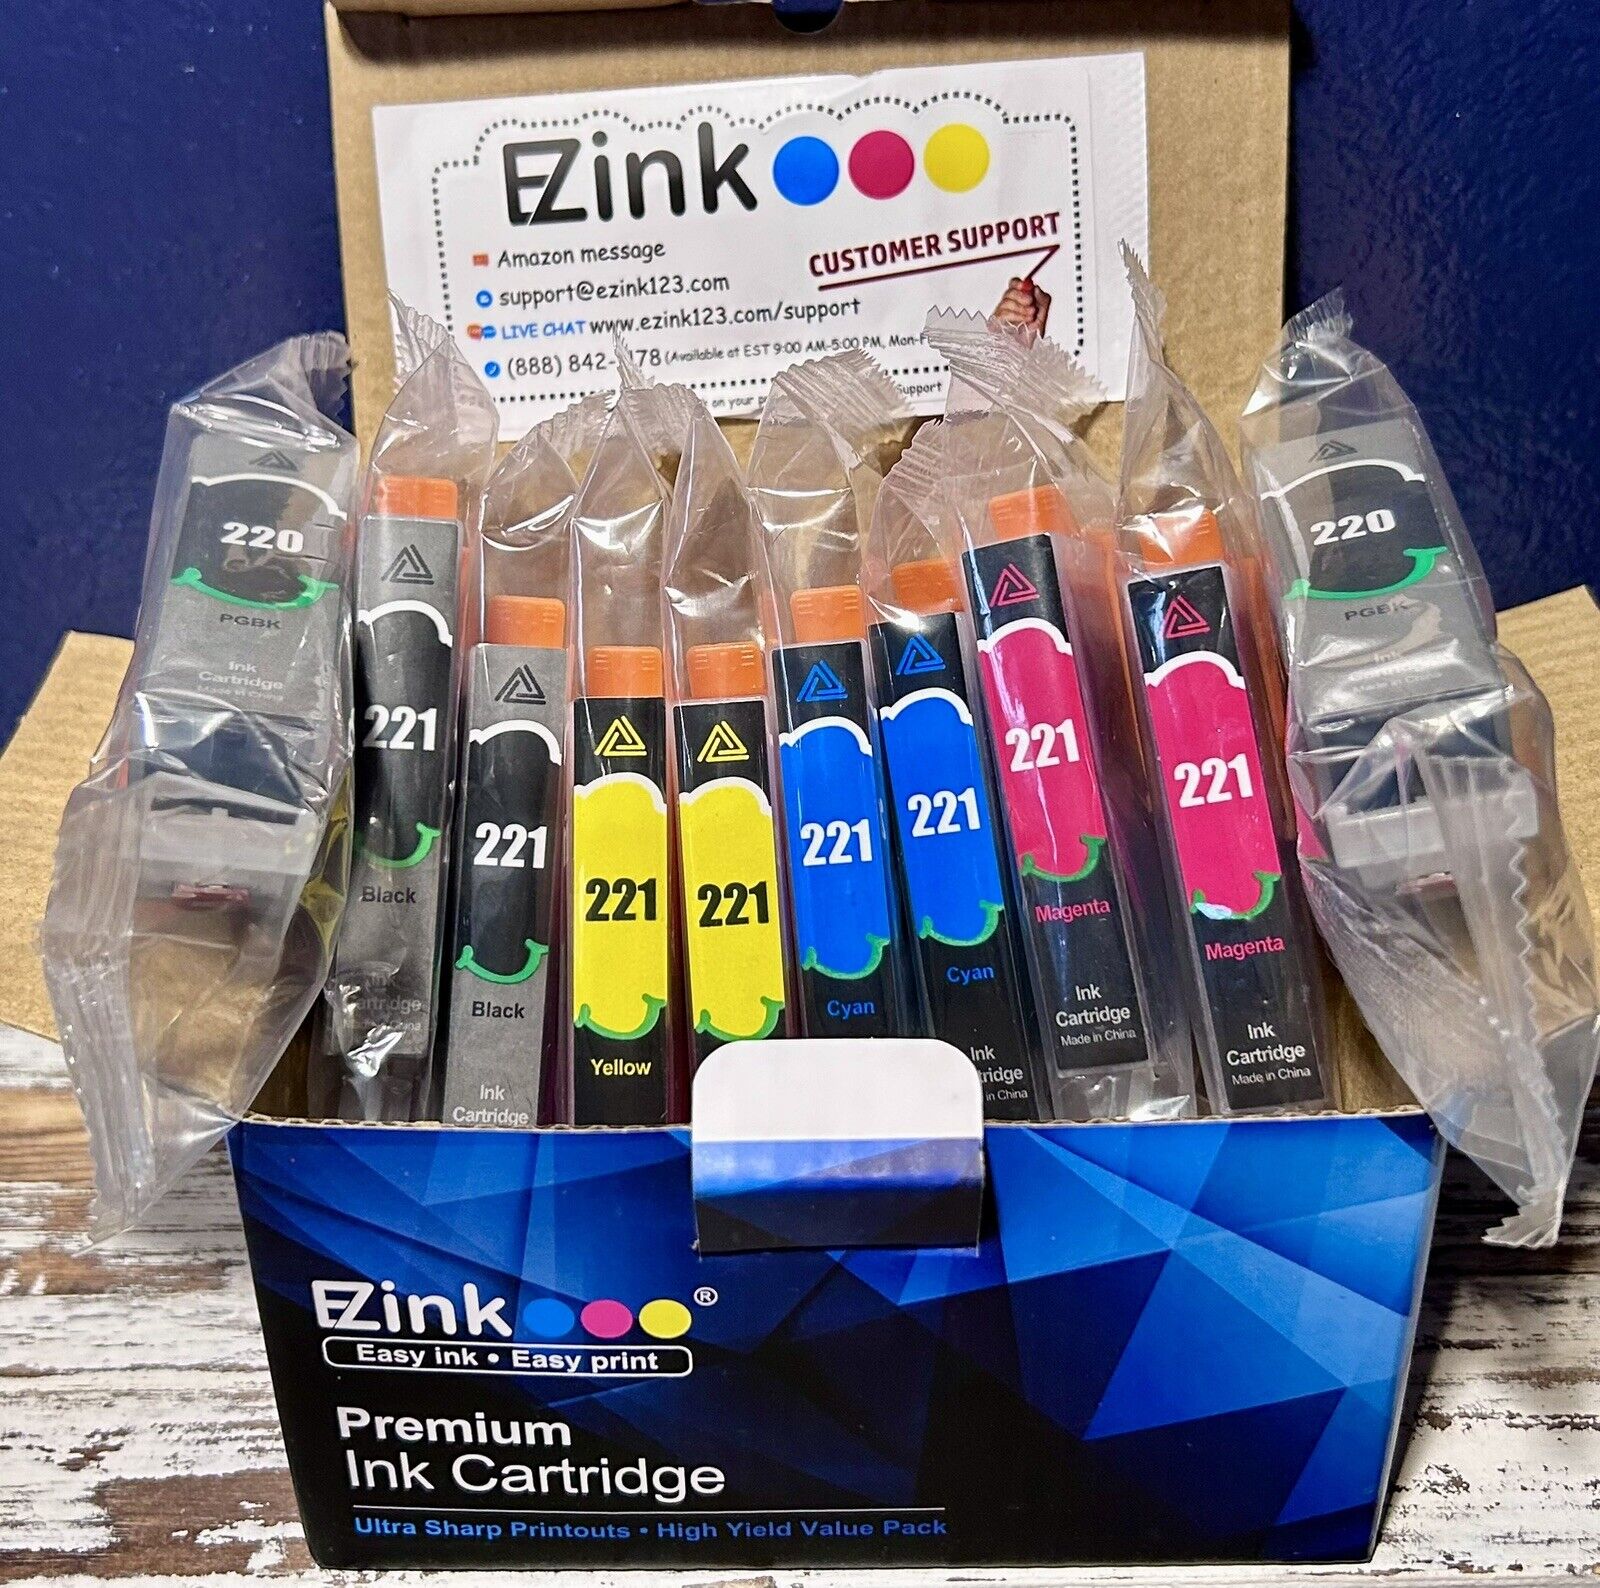 E-Z Ink  2 Large Black, 2 Cyan, 2 Magenta, 2 Yellow, 2 Small Black) 10 Pack